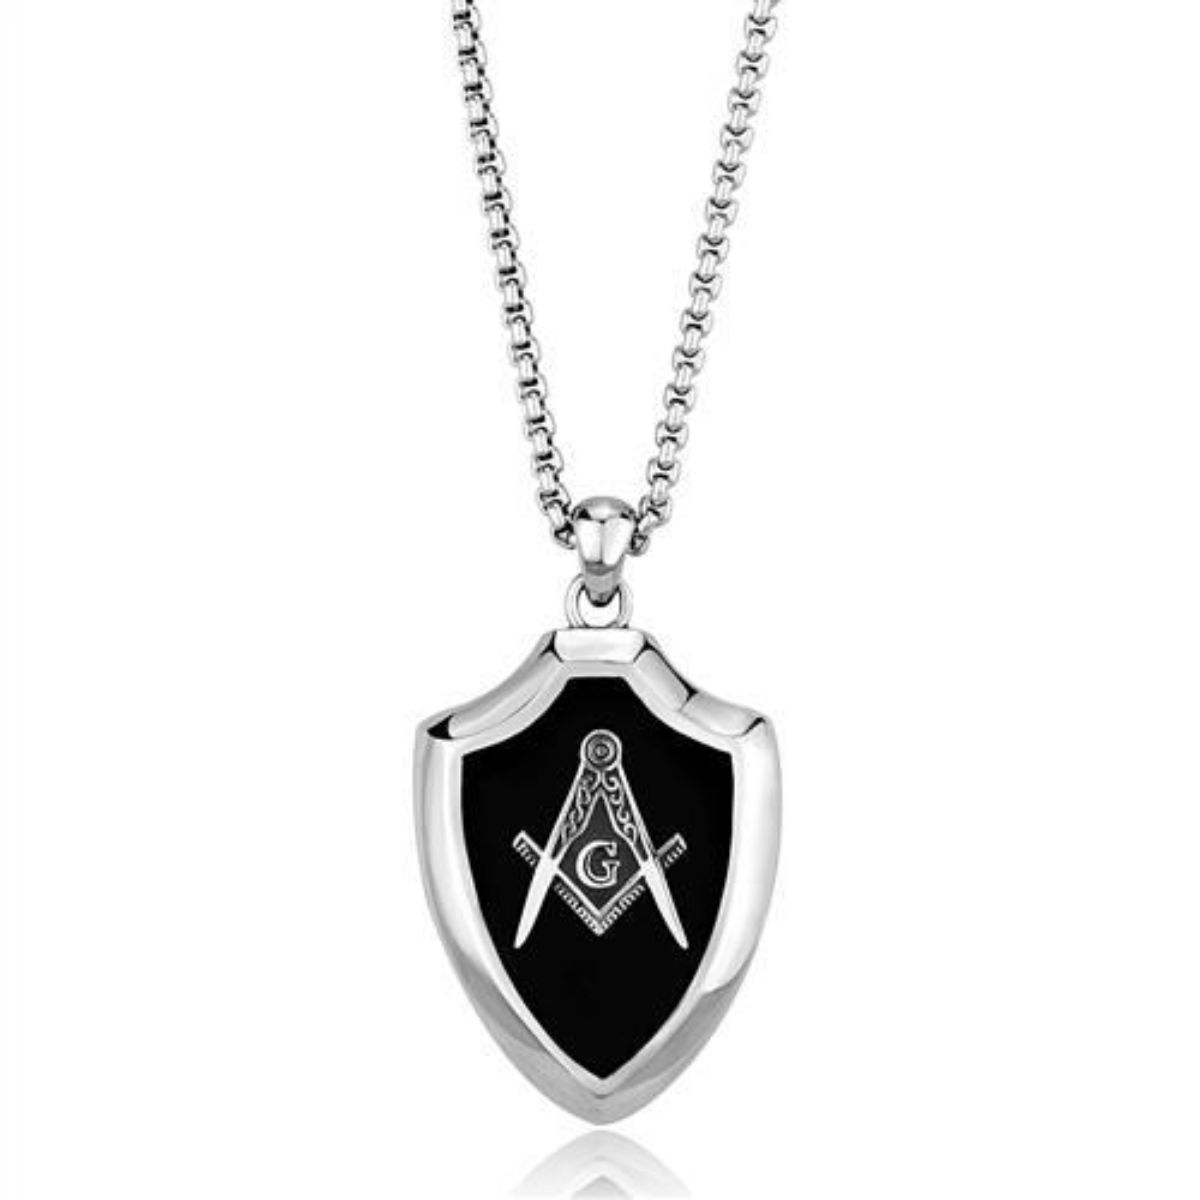 Luxe Jewelry Designs Stainless Steel Men's Chain Pendant with Black Jet Epoxy